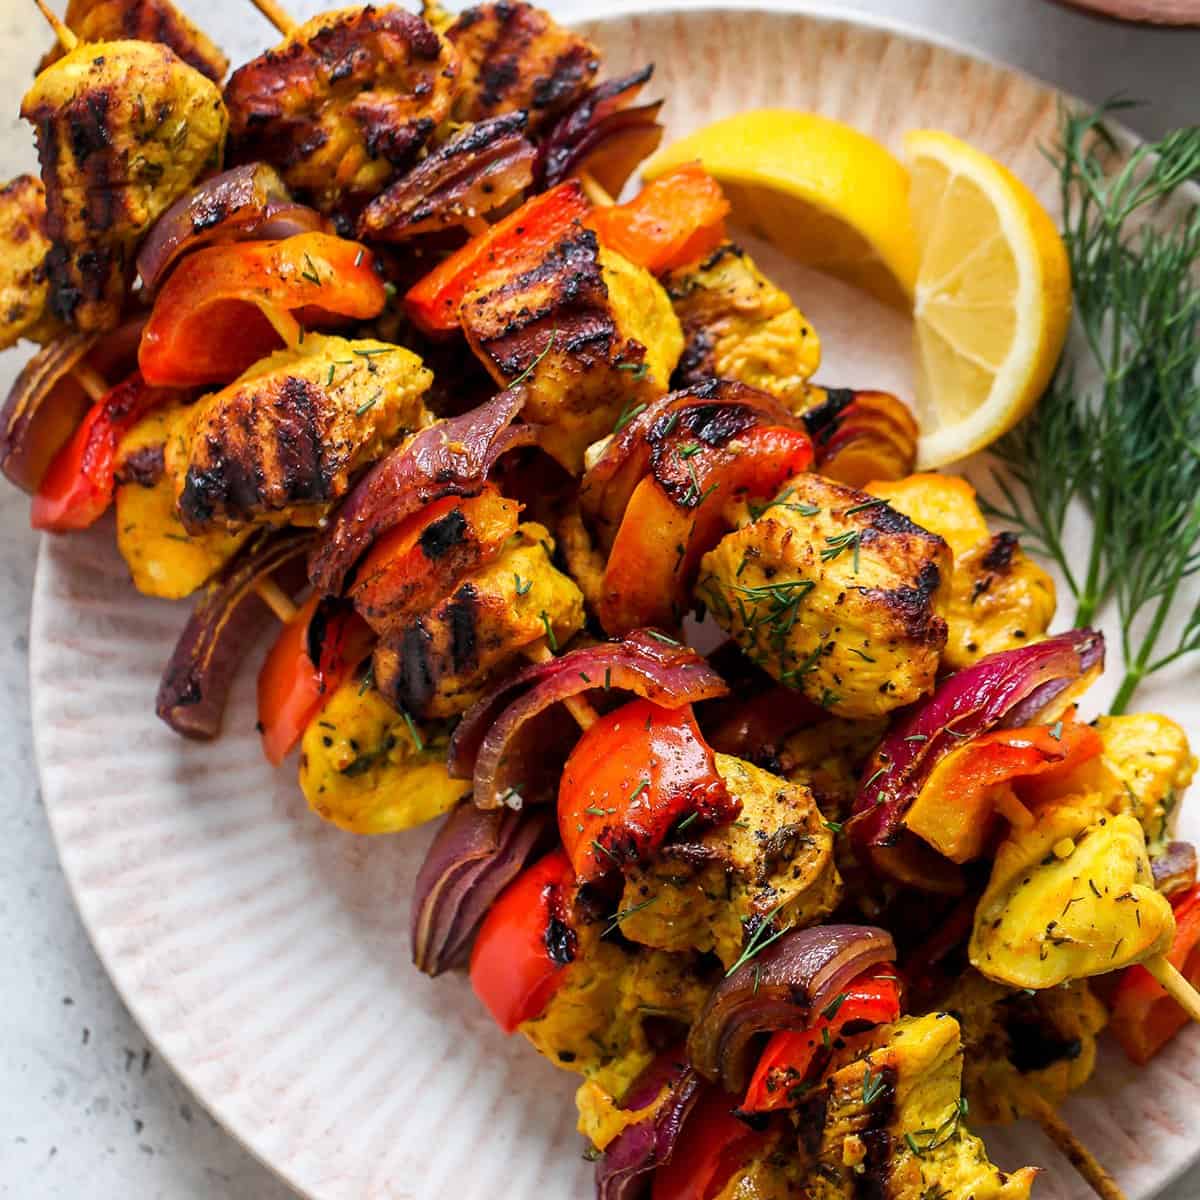 Grilled chicken recipes - kebabs